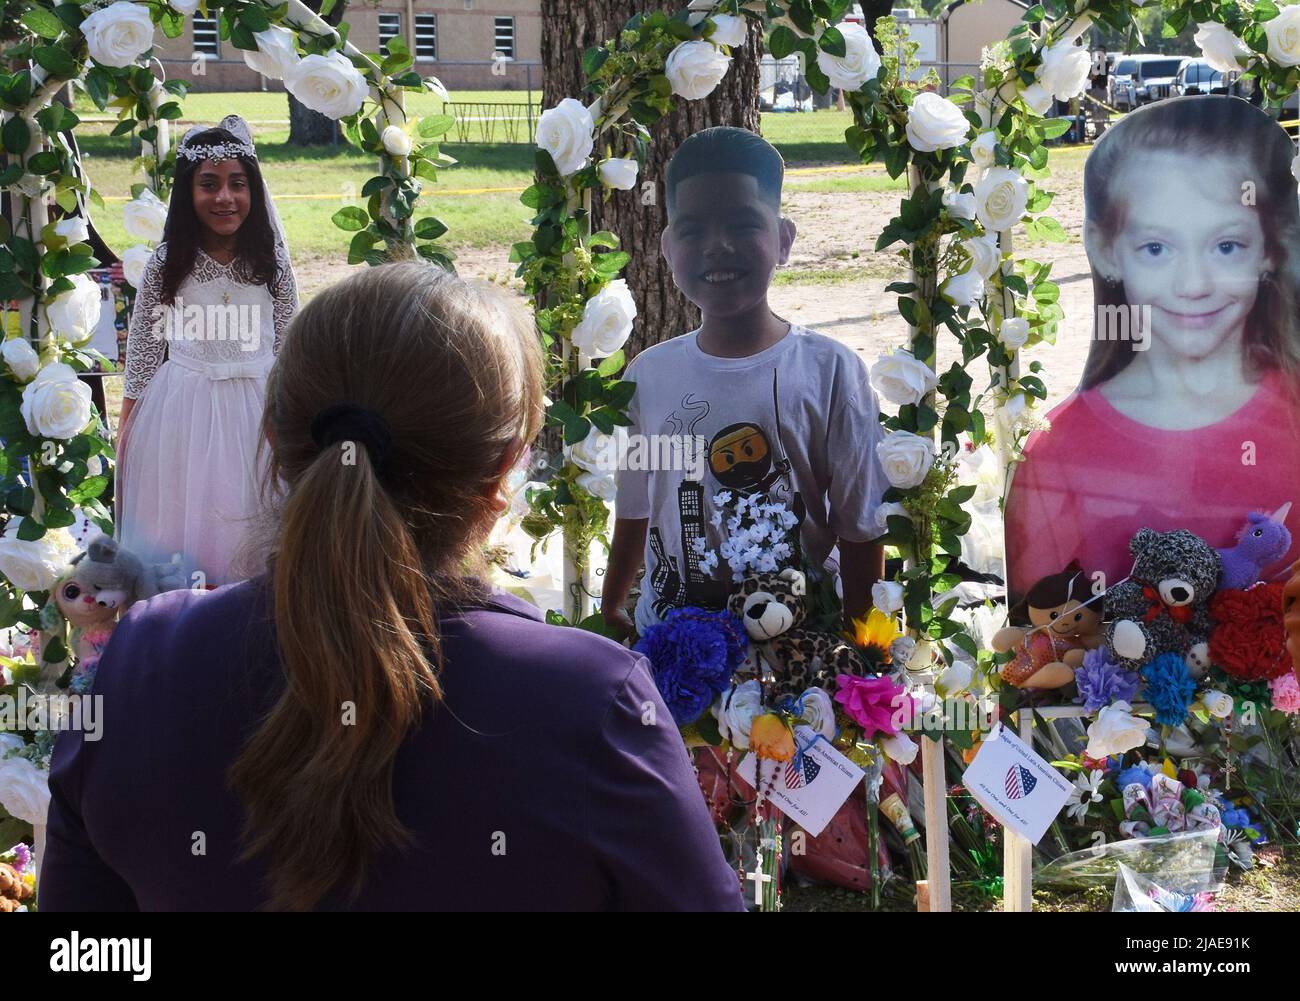 Uvalde, United States. 30th May, 2022. Mourners gather at a memorial of flowers at Robb Elementary School in Uvalde, Texas on Sunday, May 29, 2022. A mass shooting days before left 19 children and two adults dead at the elementary school. Photo by Jon Farina/UPI Credit: UPI/Alamy Live News Stock Photo